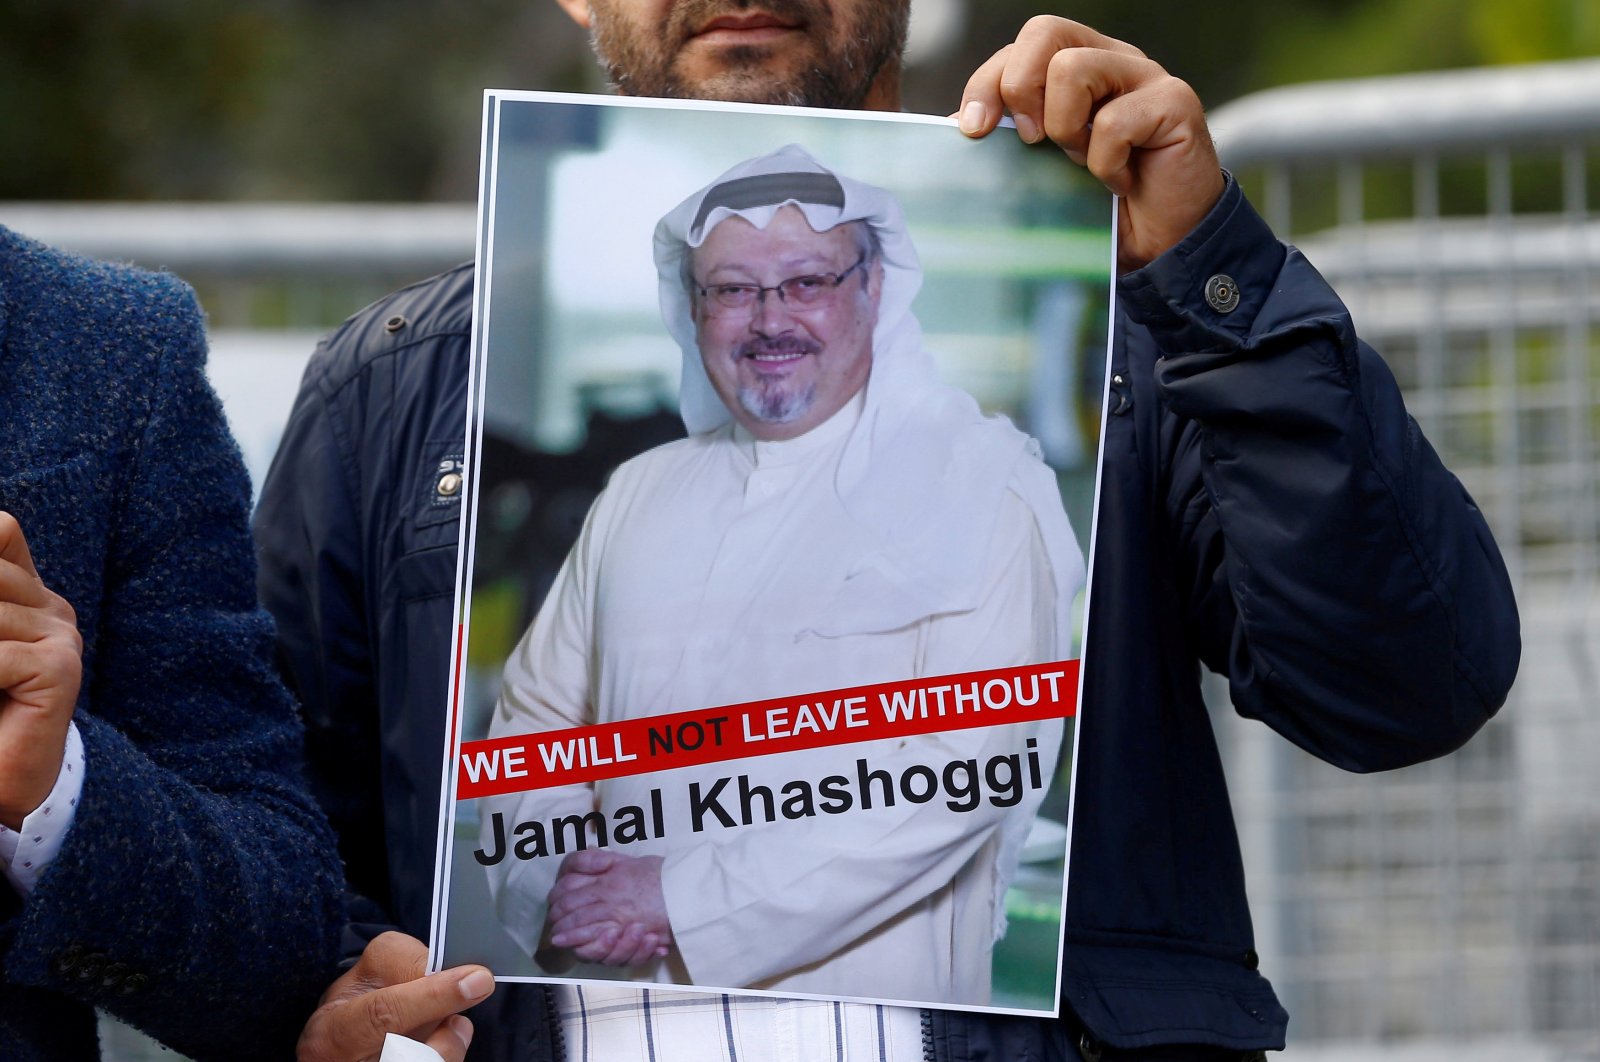 A demonstrator holds a picture of Saudi journalist Jamal Khashoggi during a protest in front of Saudi Arabia's consulate in Istanbul, Turkey, Oct. 5, 2018. (Reuters Photo)